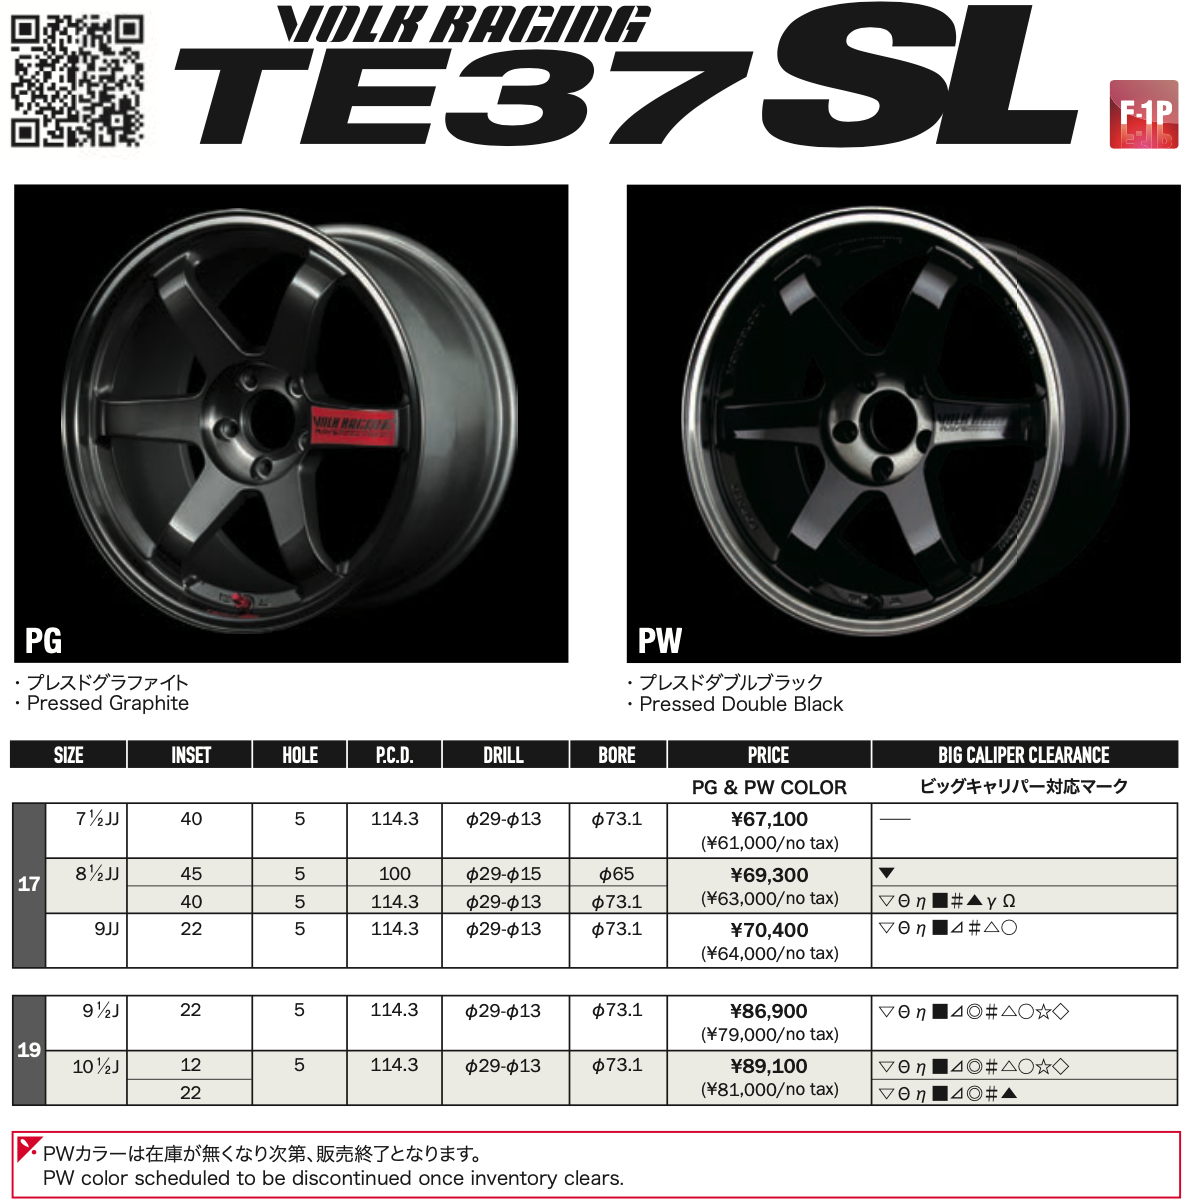 Volks Racing TE37SL from the 2021 Catalog